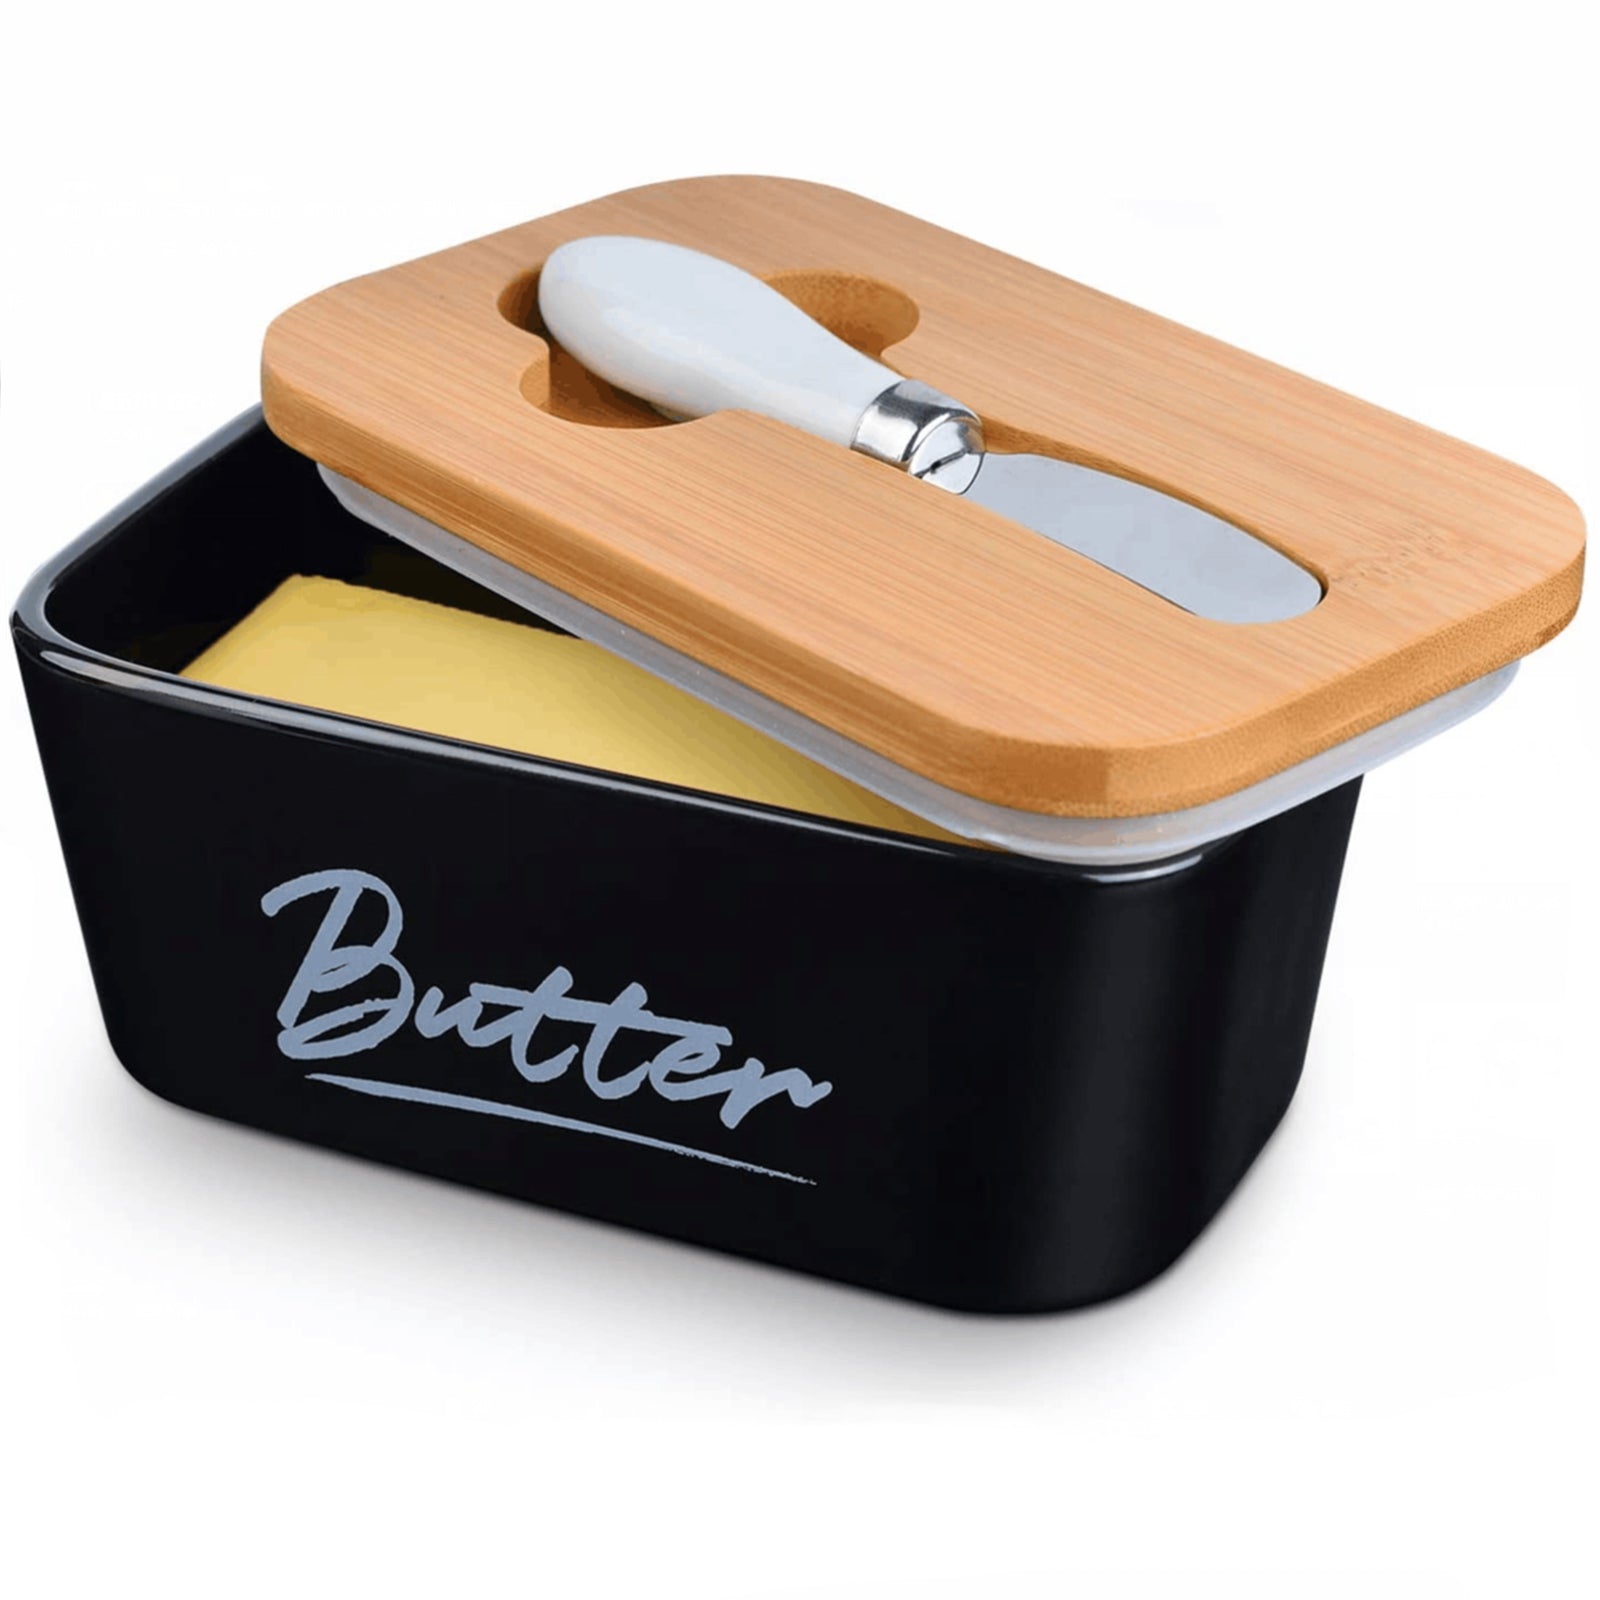 Bamboo Butter Dish with Lid for Countertop or Refrigerator  Storage - Butter Stick Holder to Leave On Counter - Single Butter Stick  Butter Tray Keeper for Kitchen & Fridge: Butter Dishes